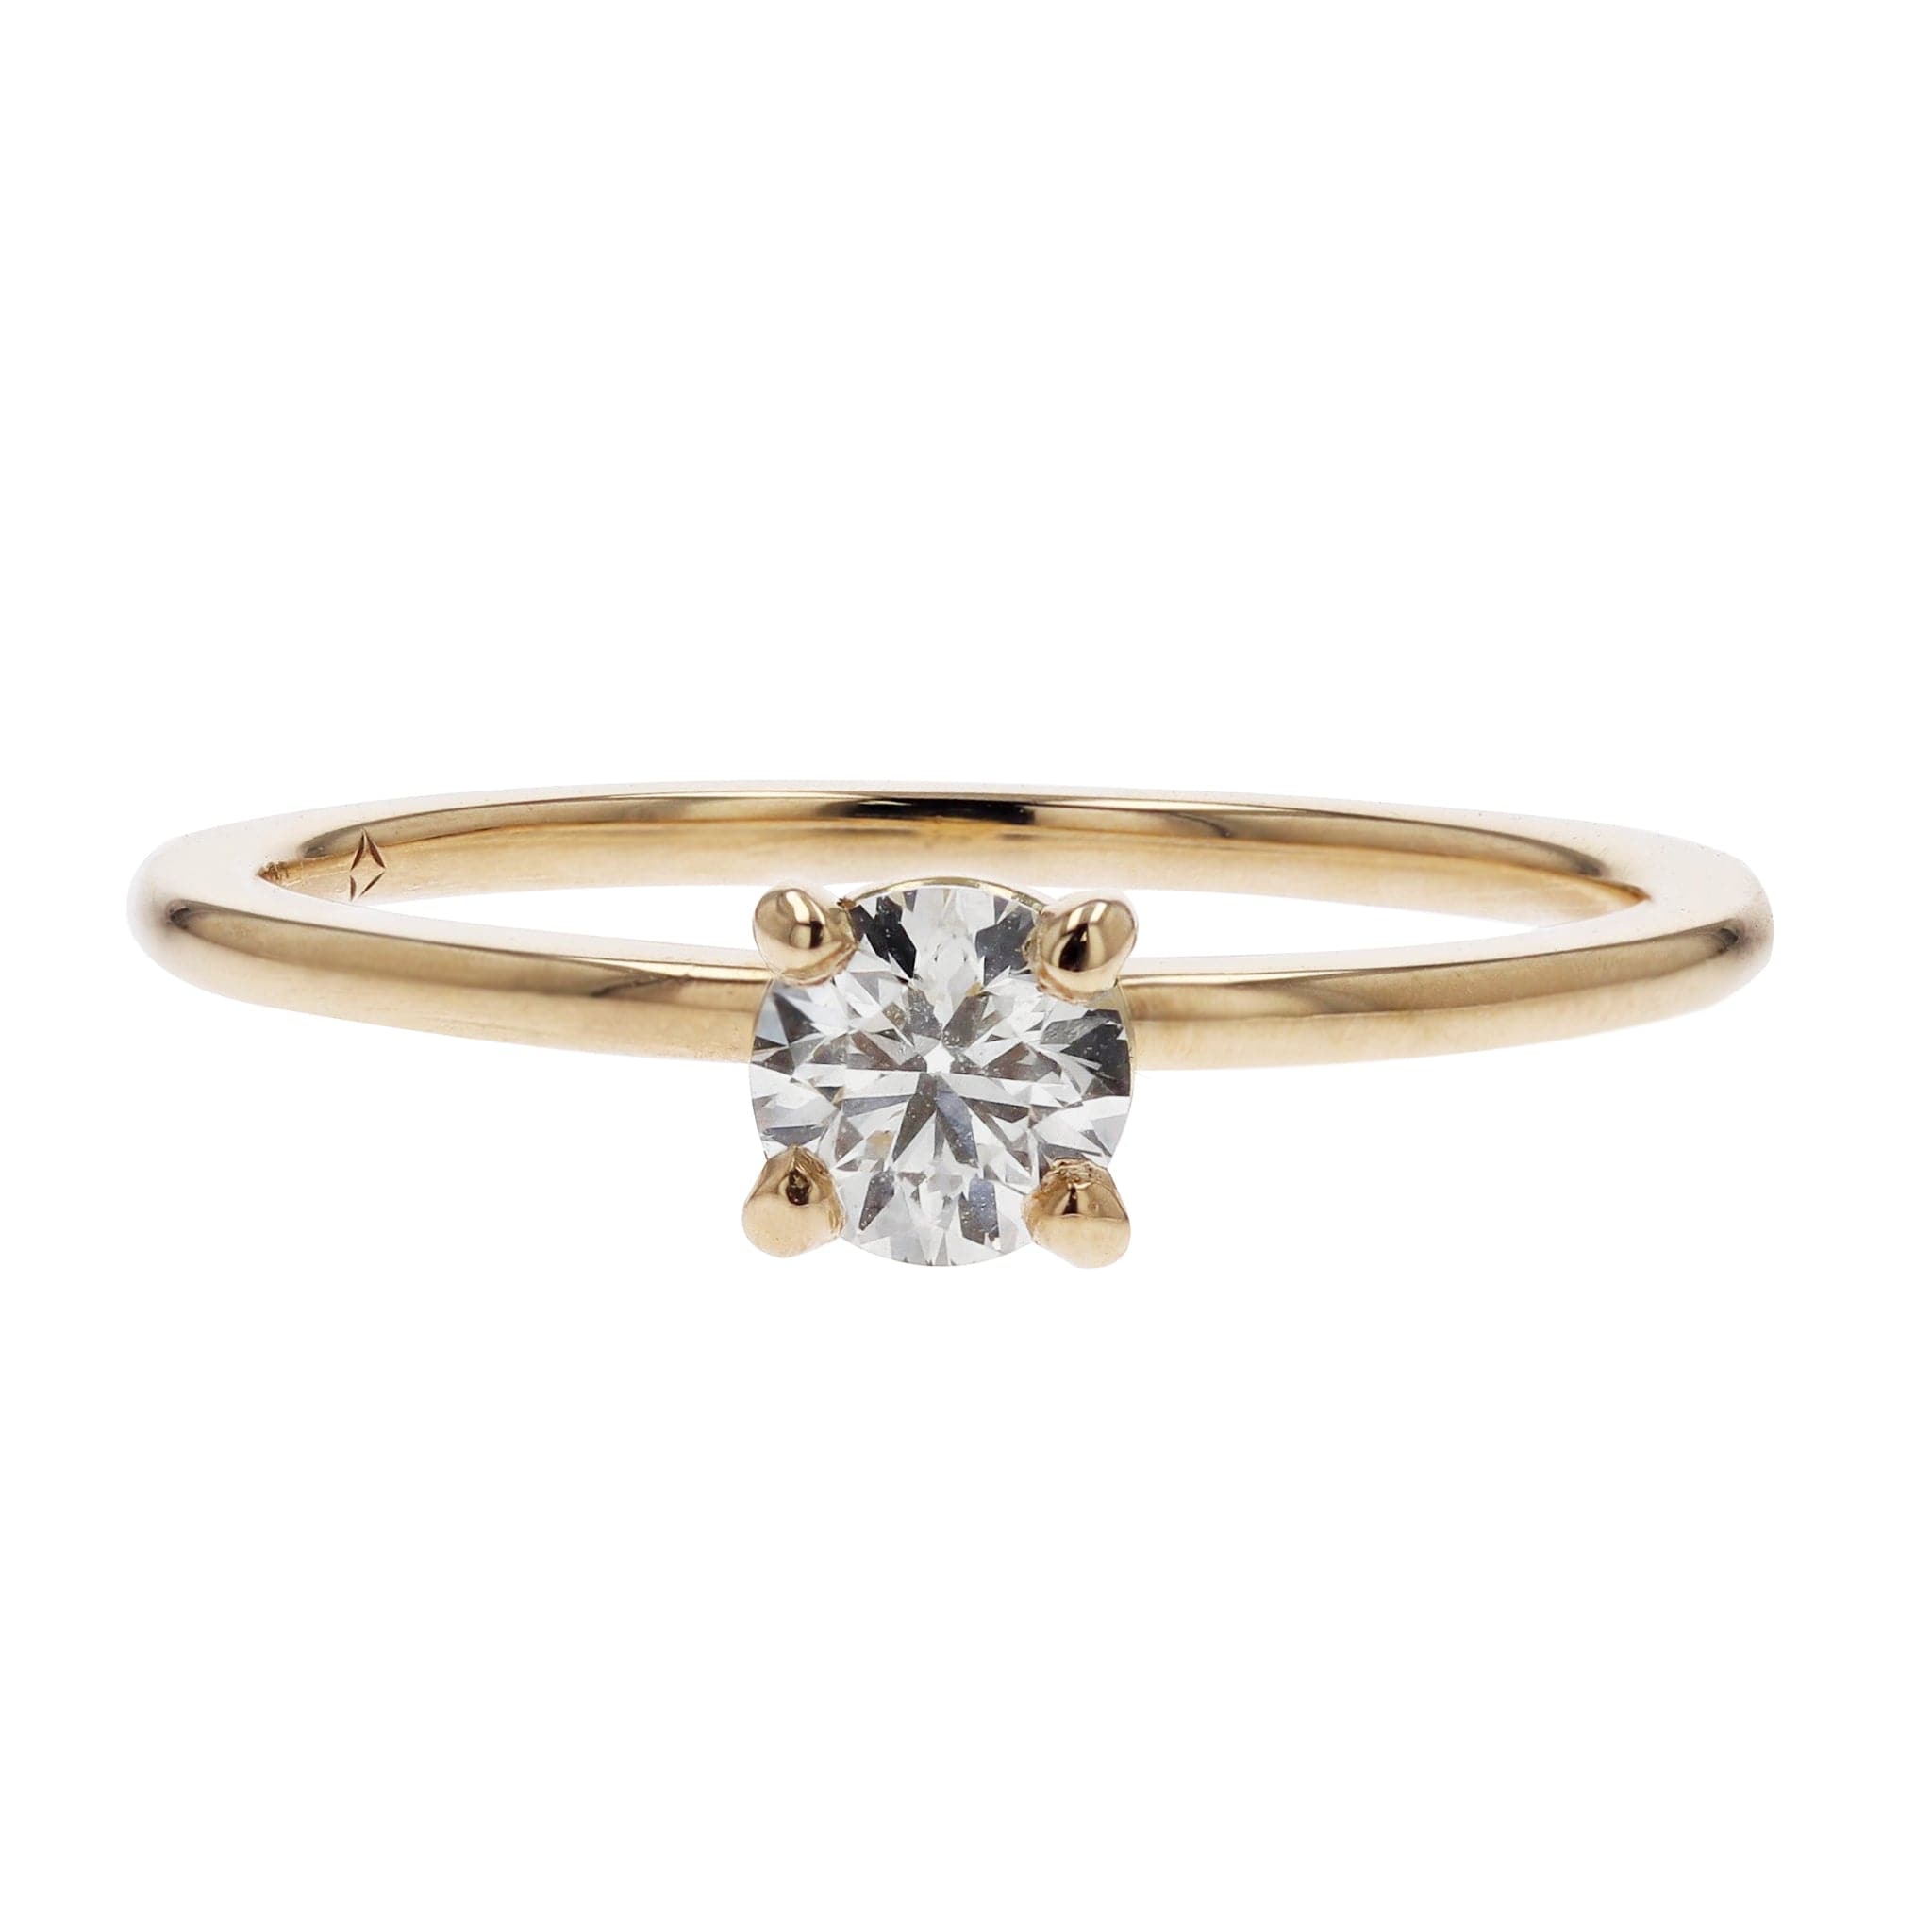 De Beers Forevermark Diamond Solitaire Oval-Cut Diamond Engagement